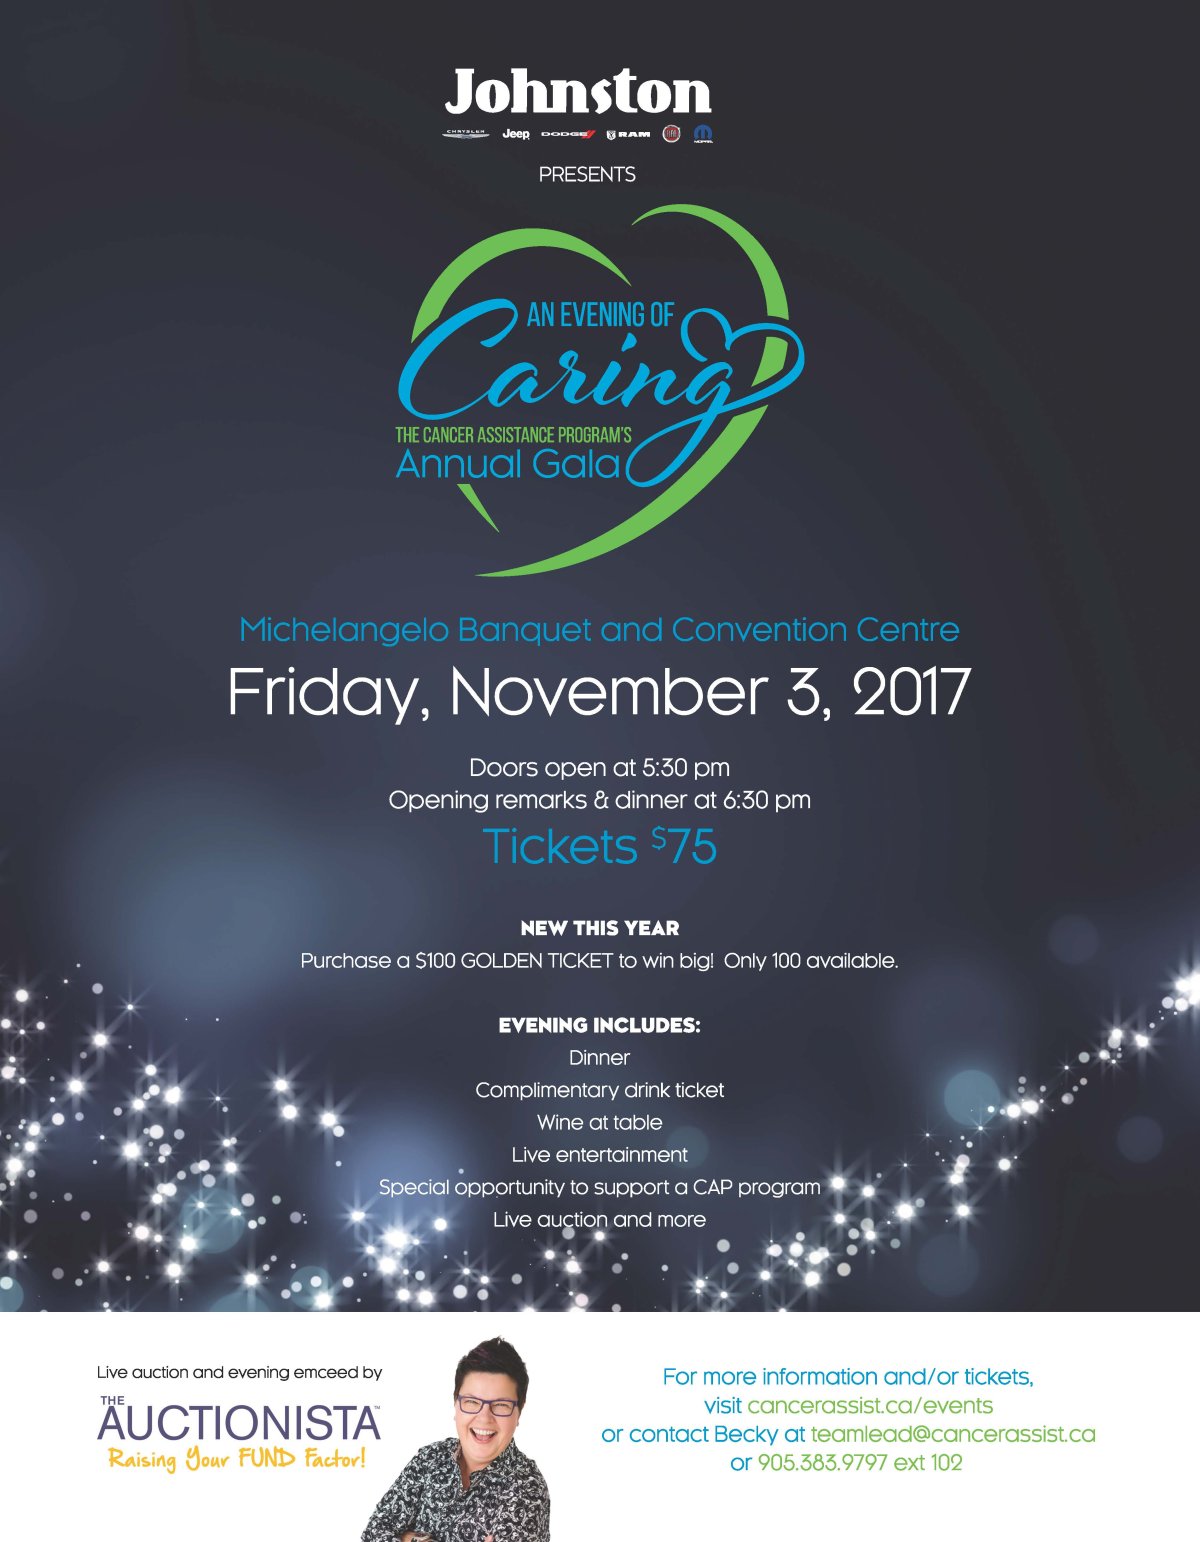 Cancer Assistance Program’s Annual Gala “An Evening of Caring” - image